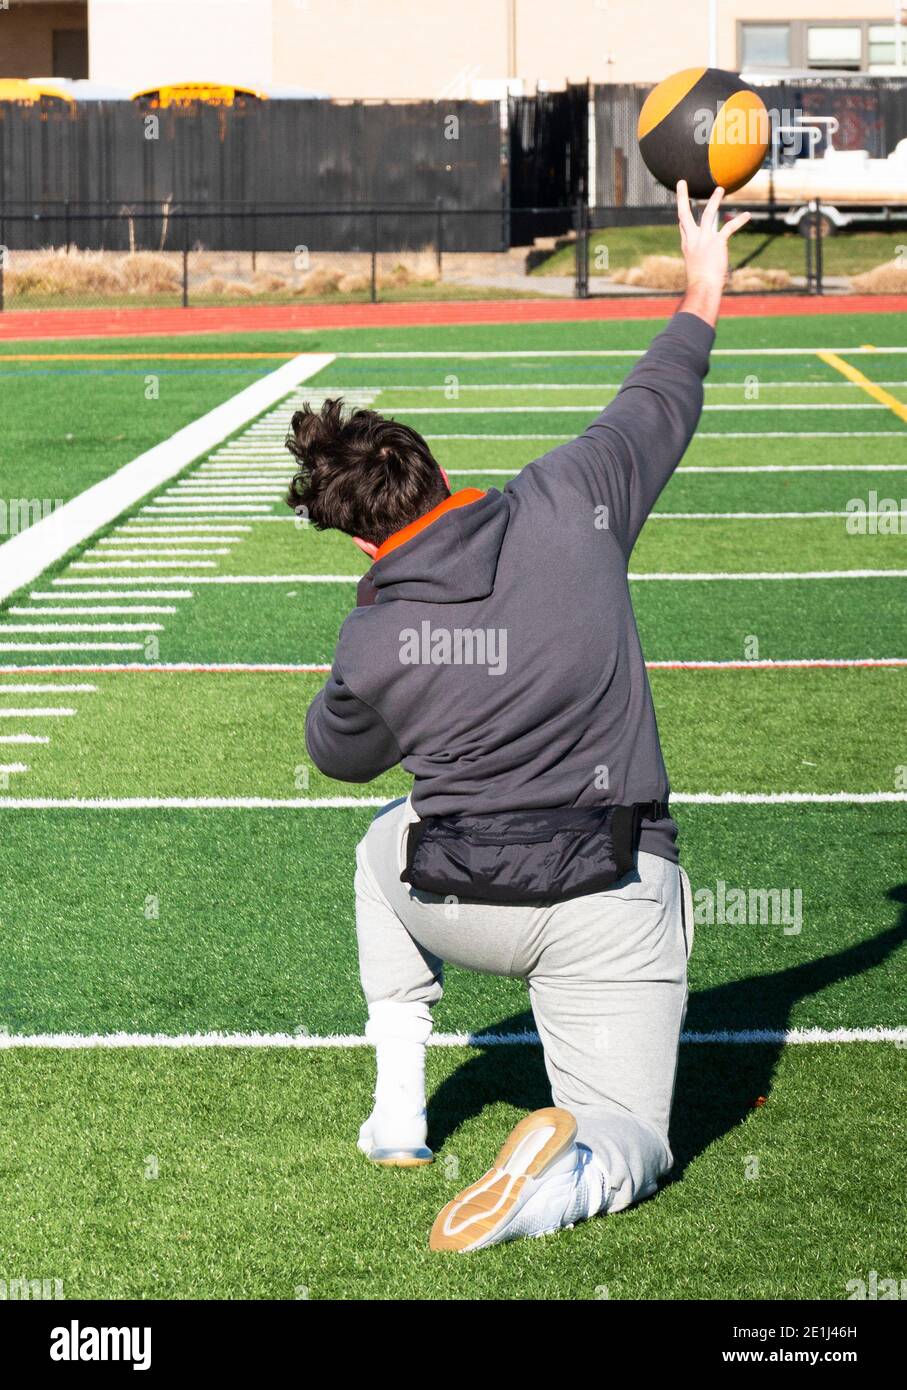 A high school athlete practicing for the shot put throwing event by throwing a medicine ball from his knees on a green turf field at track and field p Stock Photo